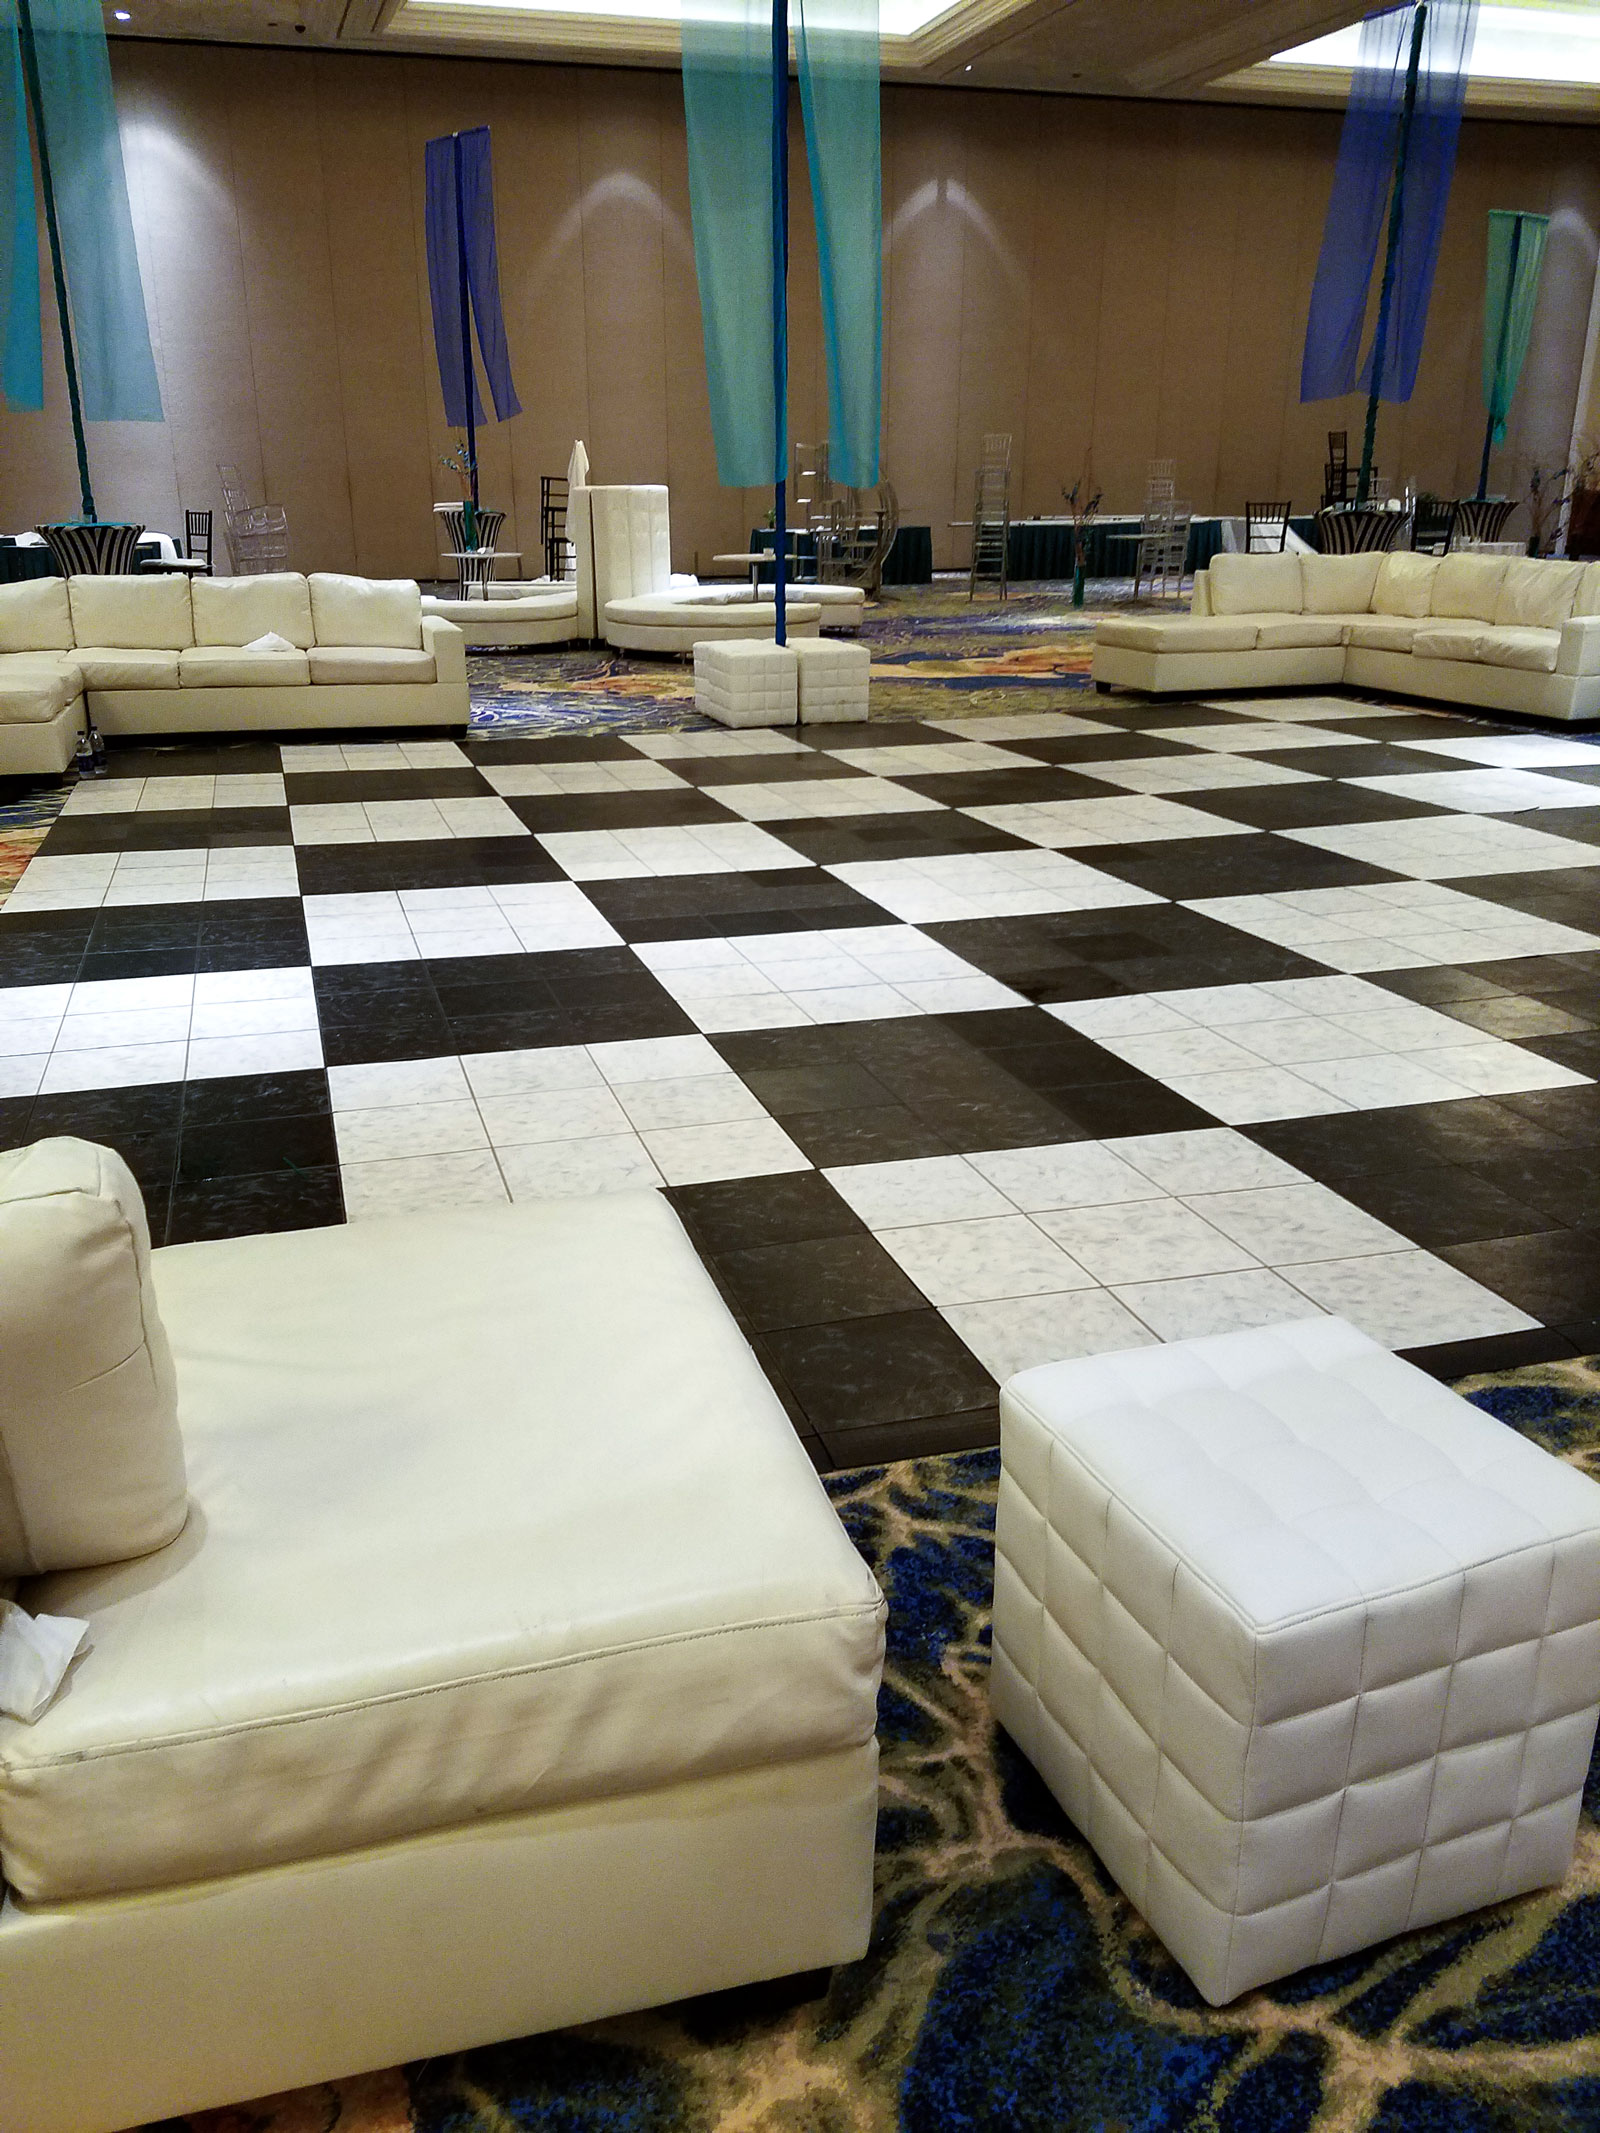 Black and White luxury marble style flooring in this indoor area